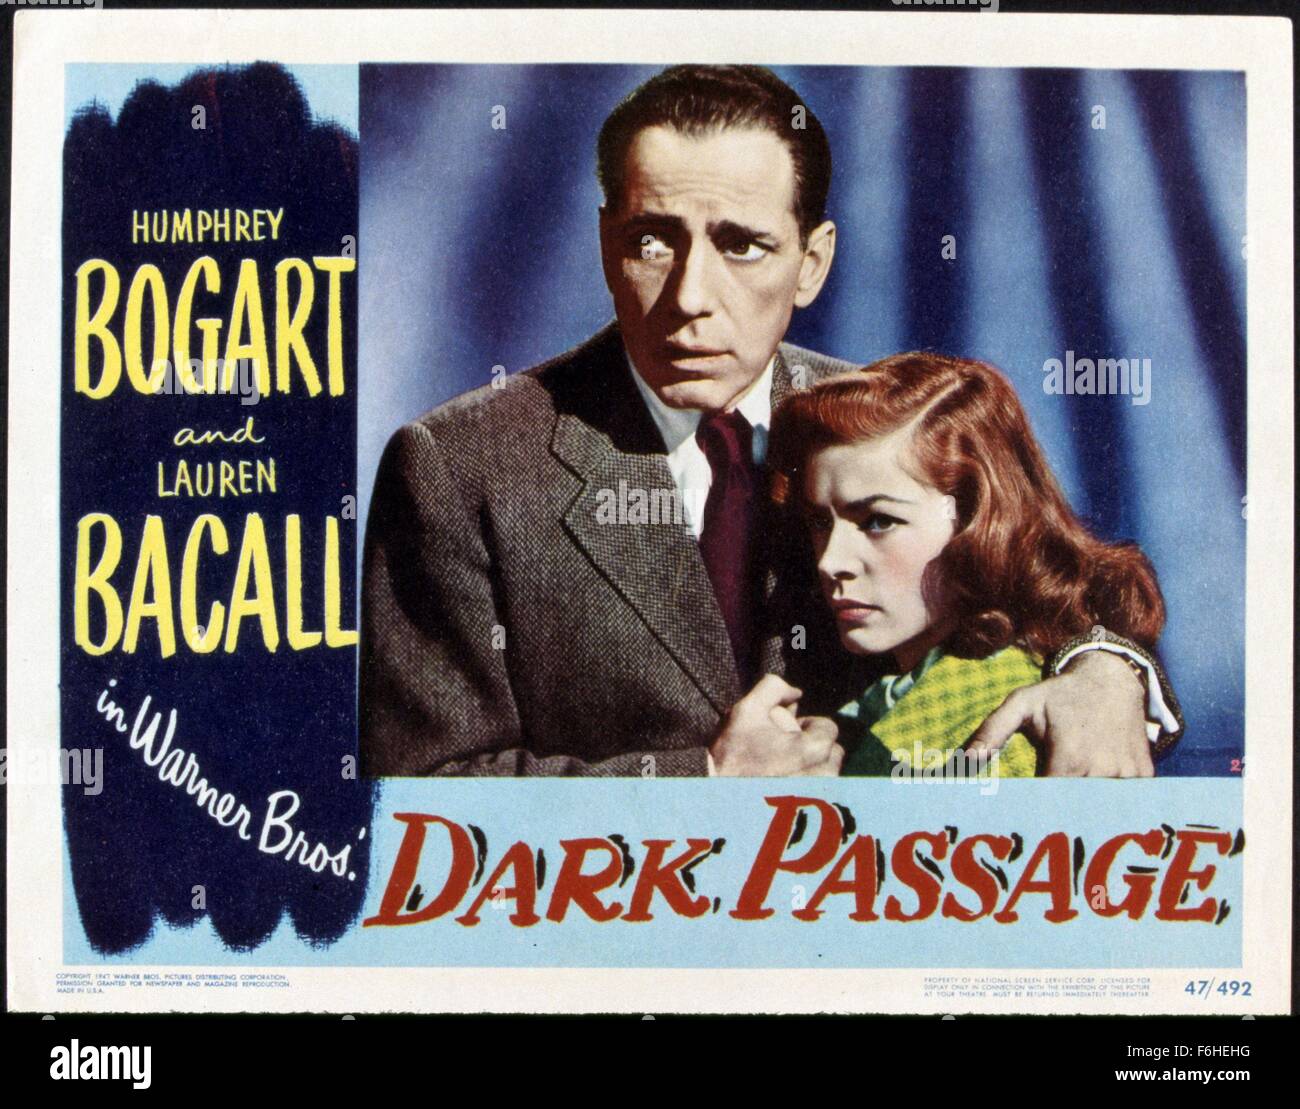 1947, Film Title: DARK PASSAGE, Director: DELMER DAVES, Studio: WARNER, Pictured: LAUREN BACALL, HUMPHREY BOGART, AFRAID, EMBRACE, CLINGING, PROTECTING, PROTECTION, LOBBY CARD, TERROR, UNKNOWN. (Credit Image: SNAP) Stock Photo